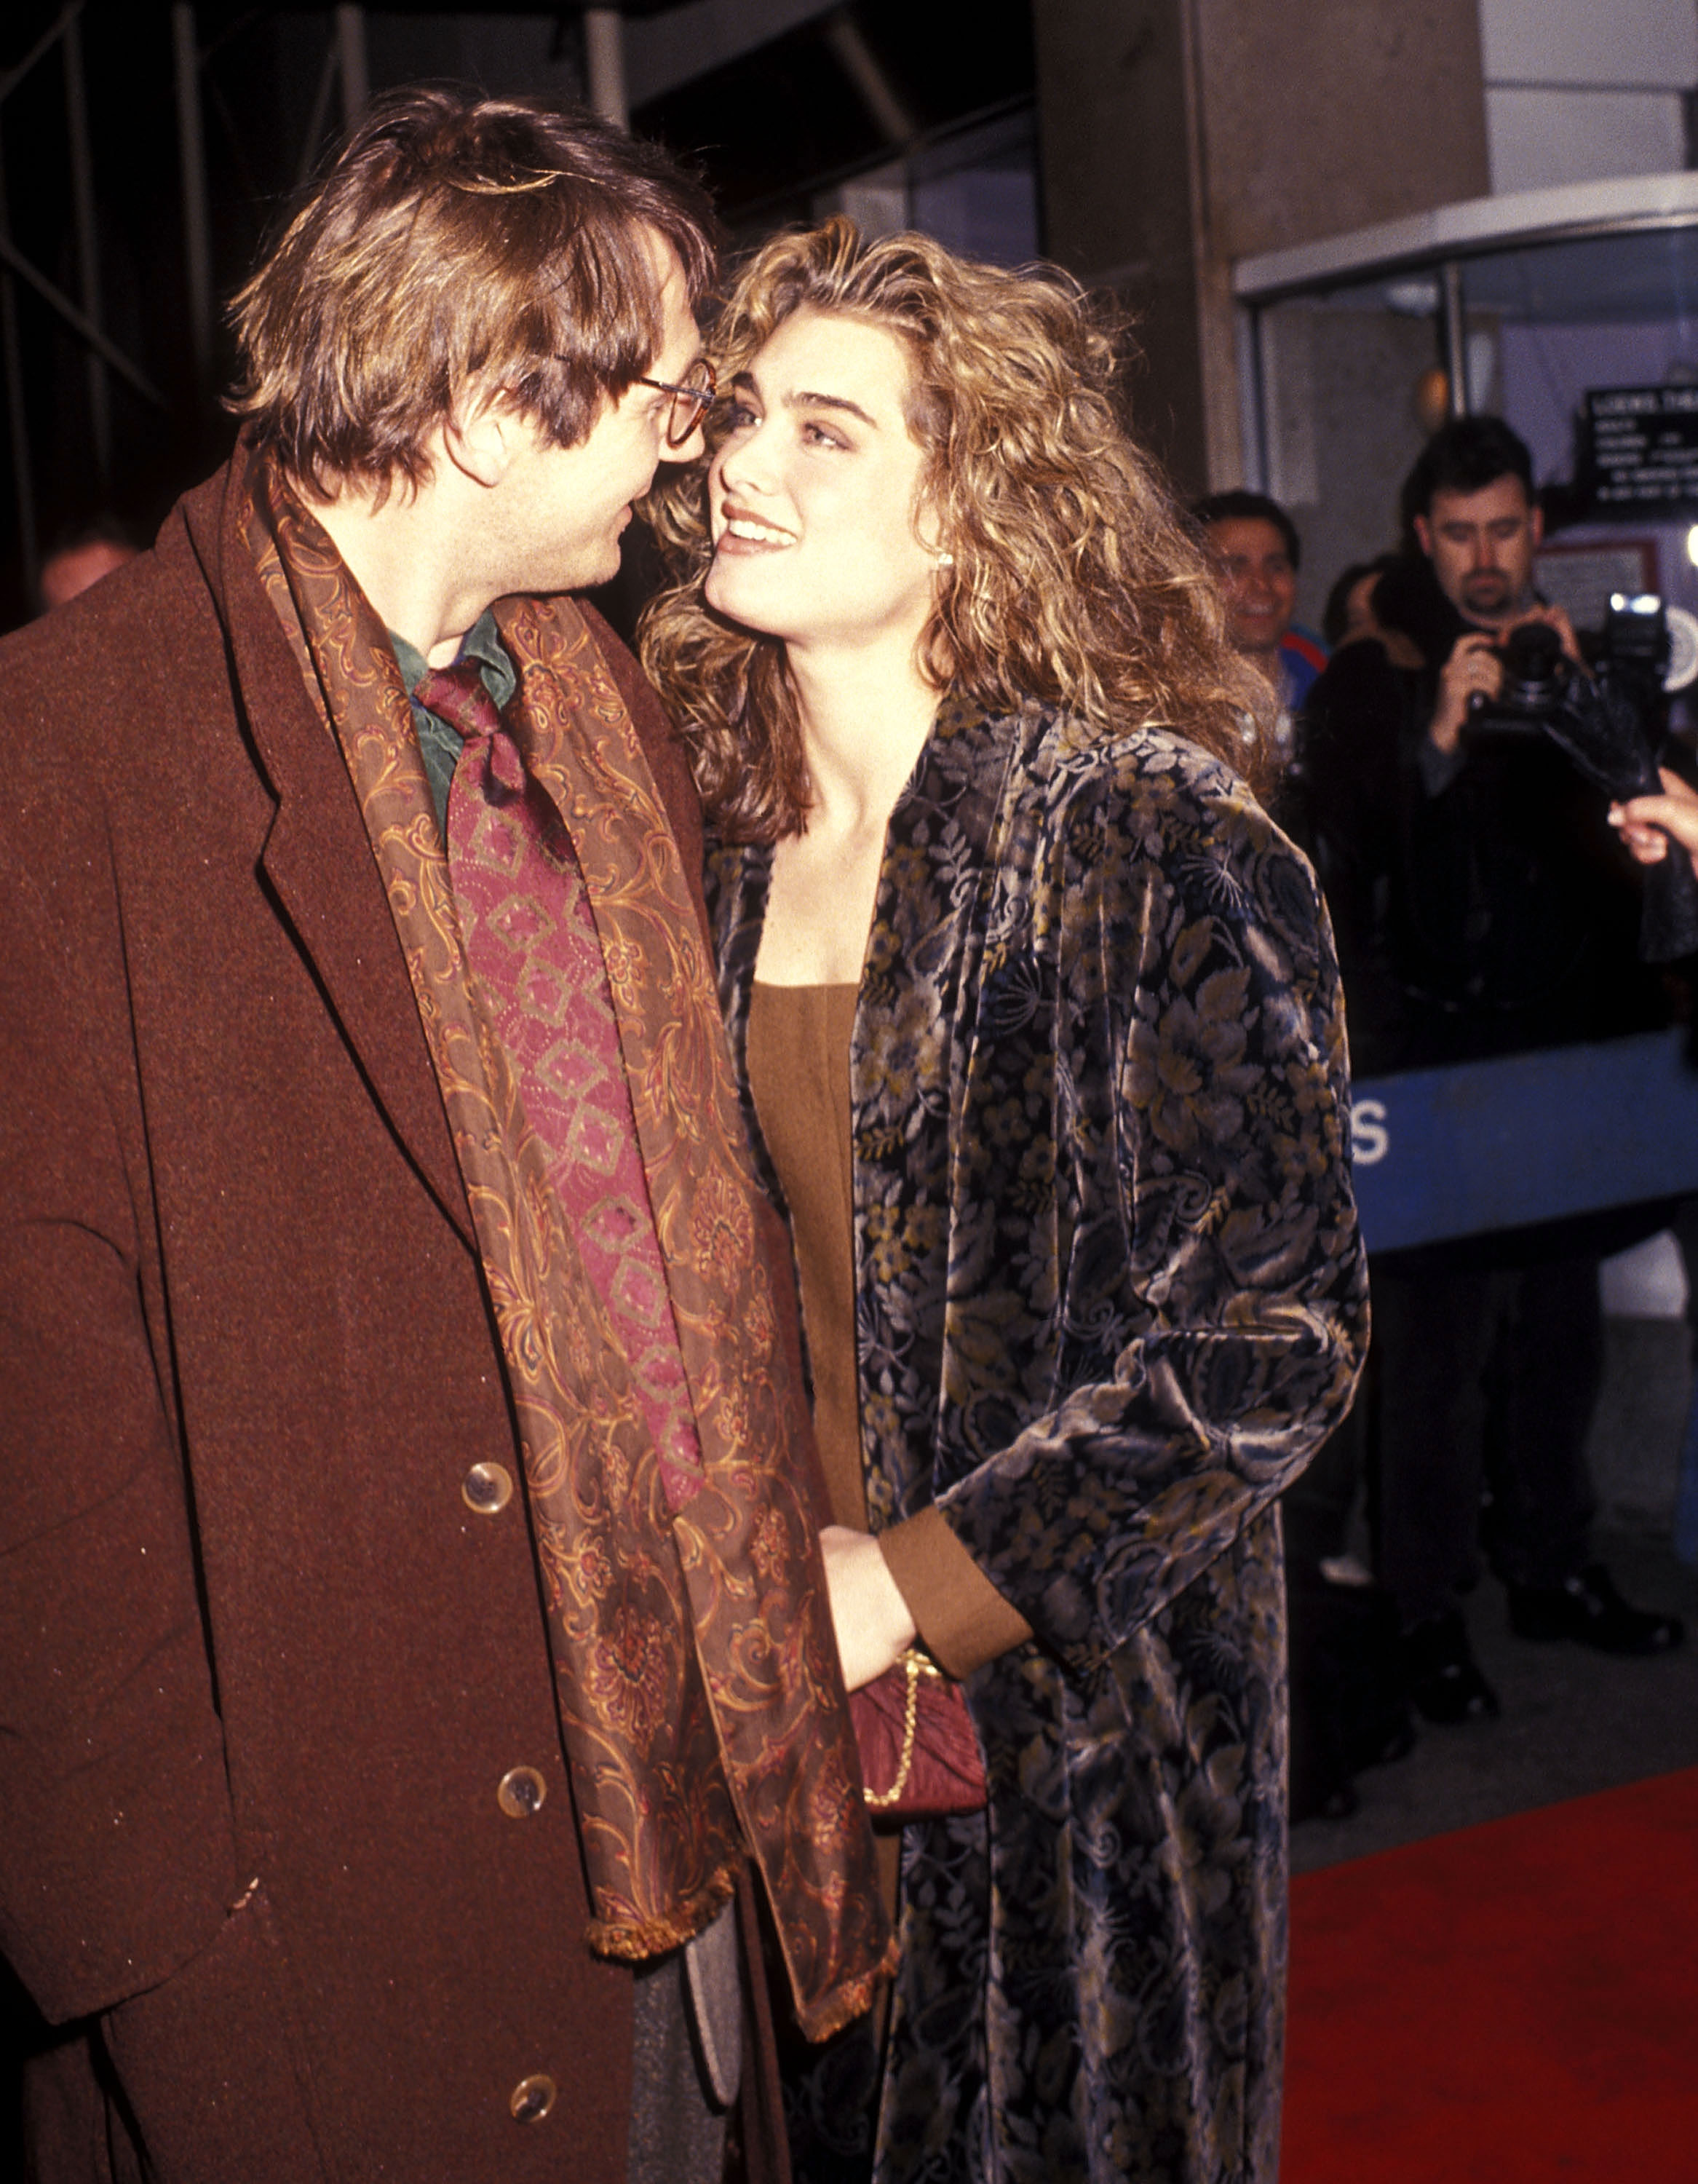 Liam Neeson and Brooke Shields on February 24, 1992, in New York City | Source: Getty Images